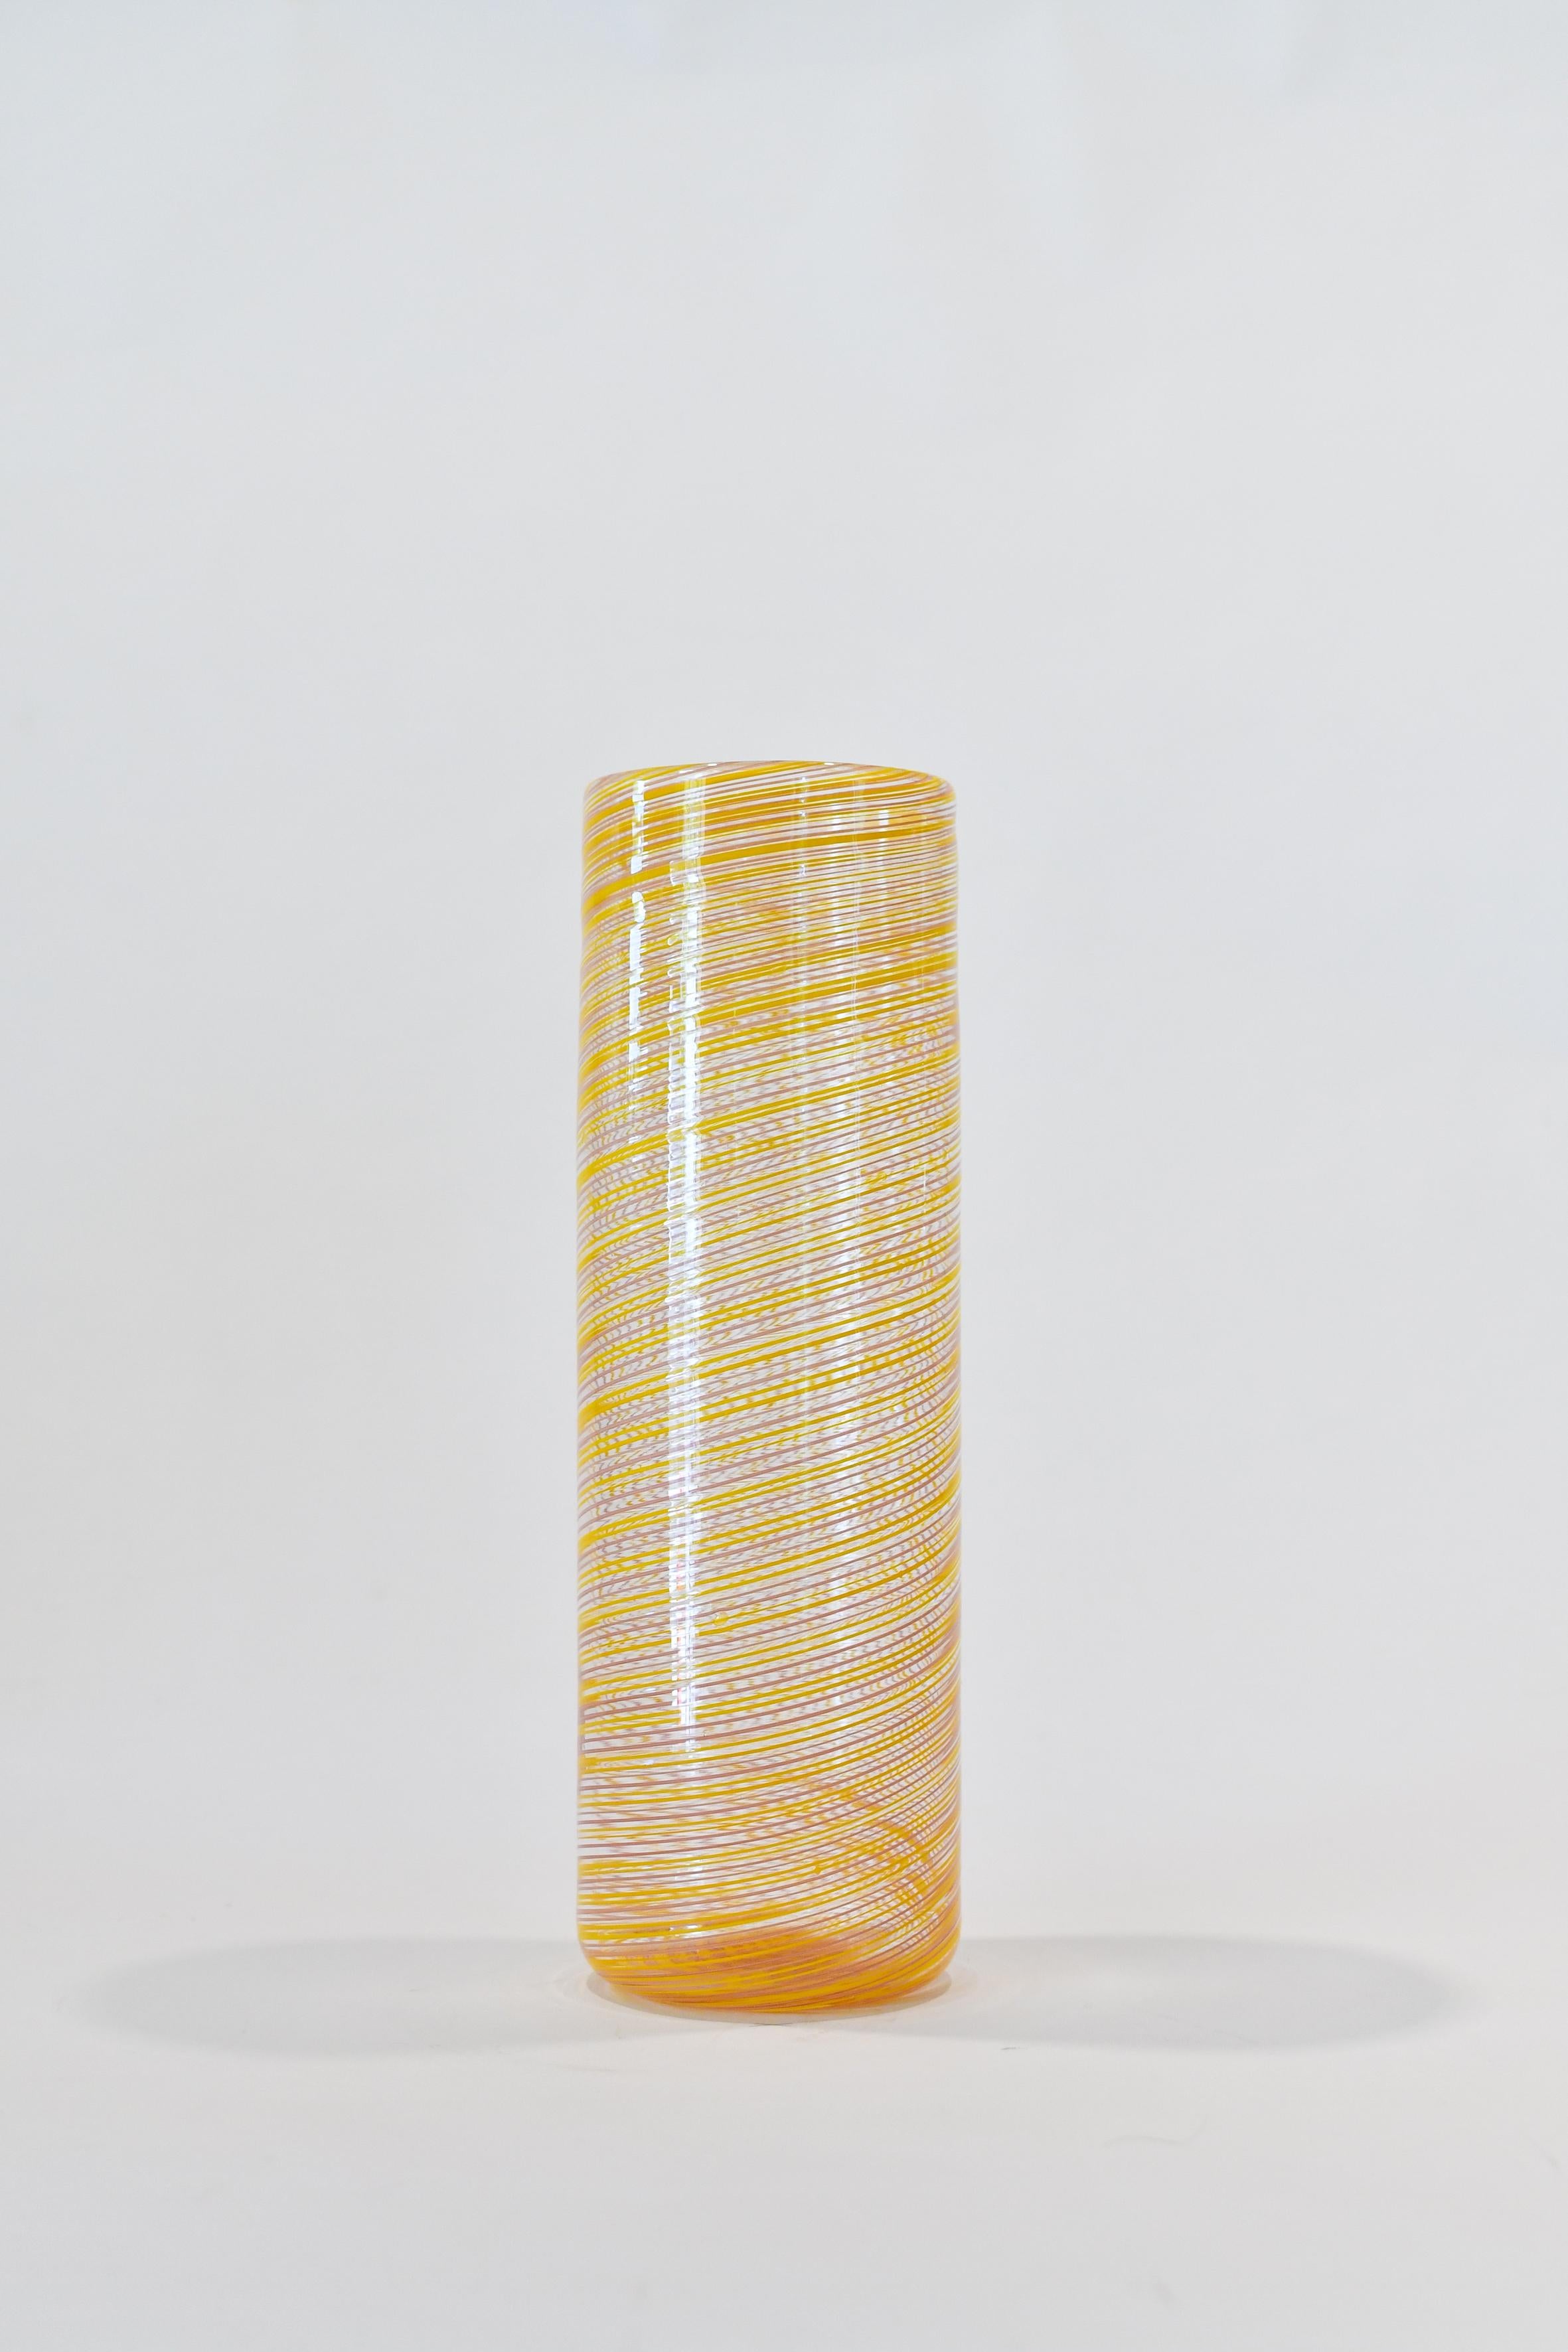 Doppio filo is a collection of vases made by combining two different colours of filigree rods. The linear, oblique pattern is obtained thanks to a refined glass making technique called “mezza filigrana” invented in Murano in the first half of the